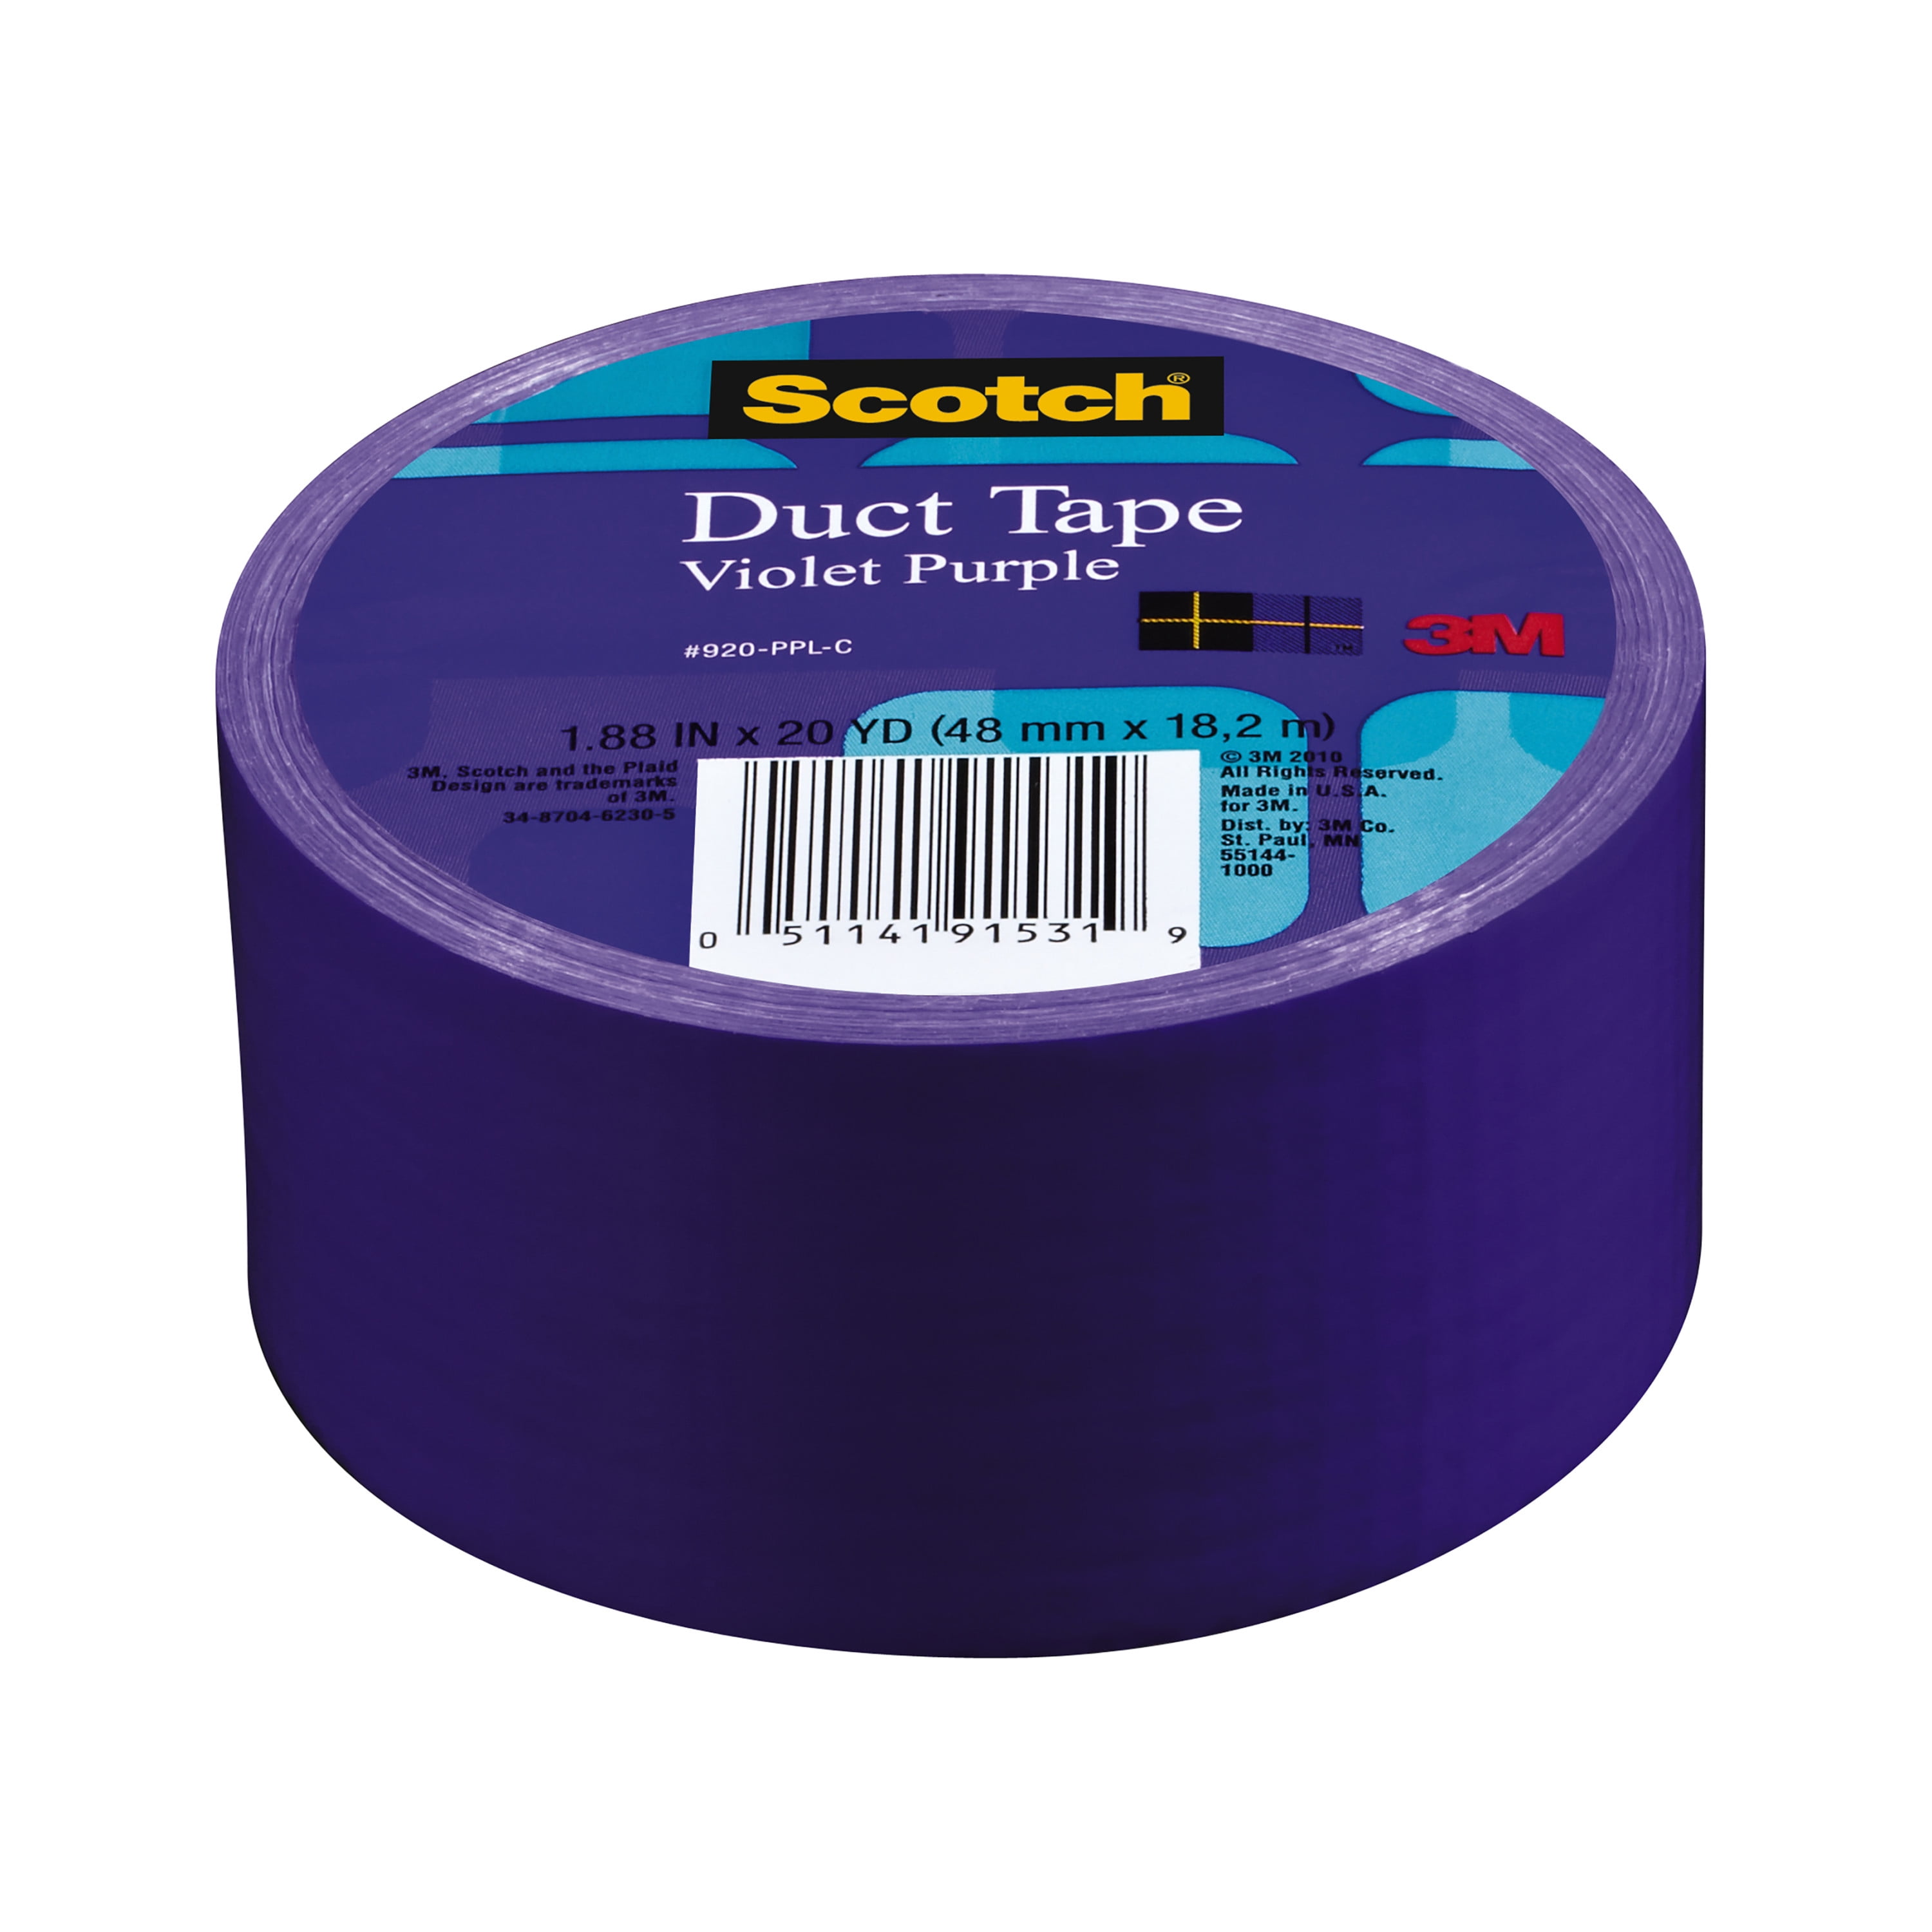 MAT Tape Purple 5.67 in. x 60 yd. Colored Duct Tape, 1 Roll 